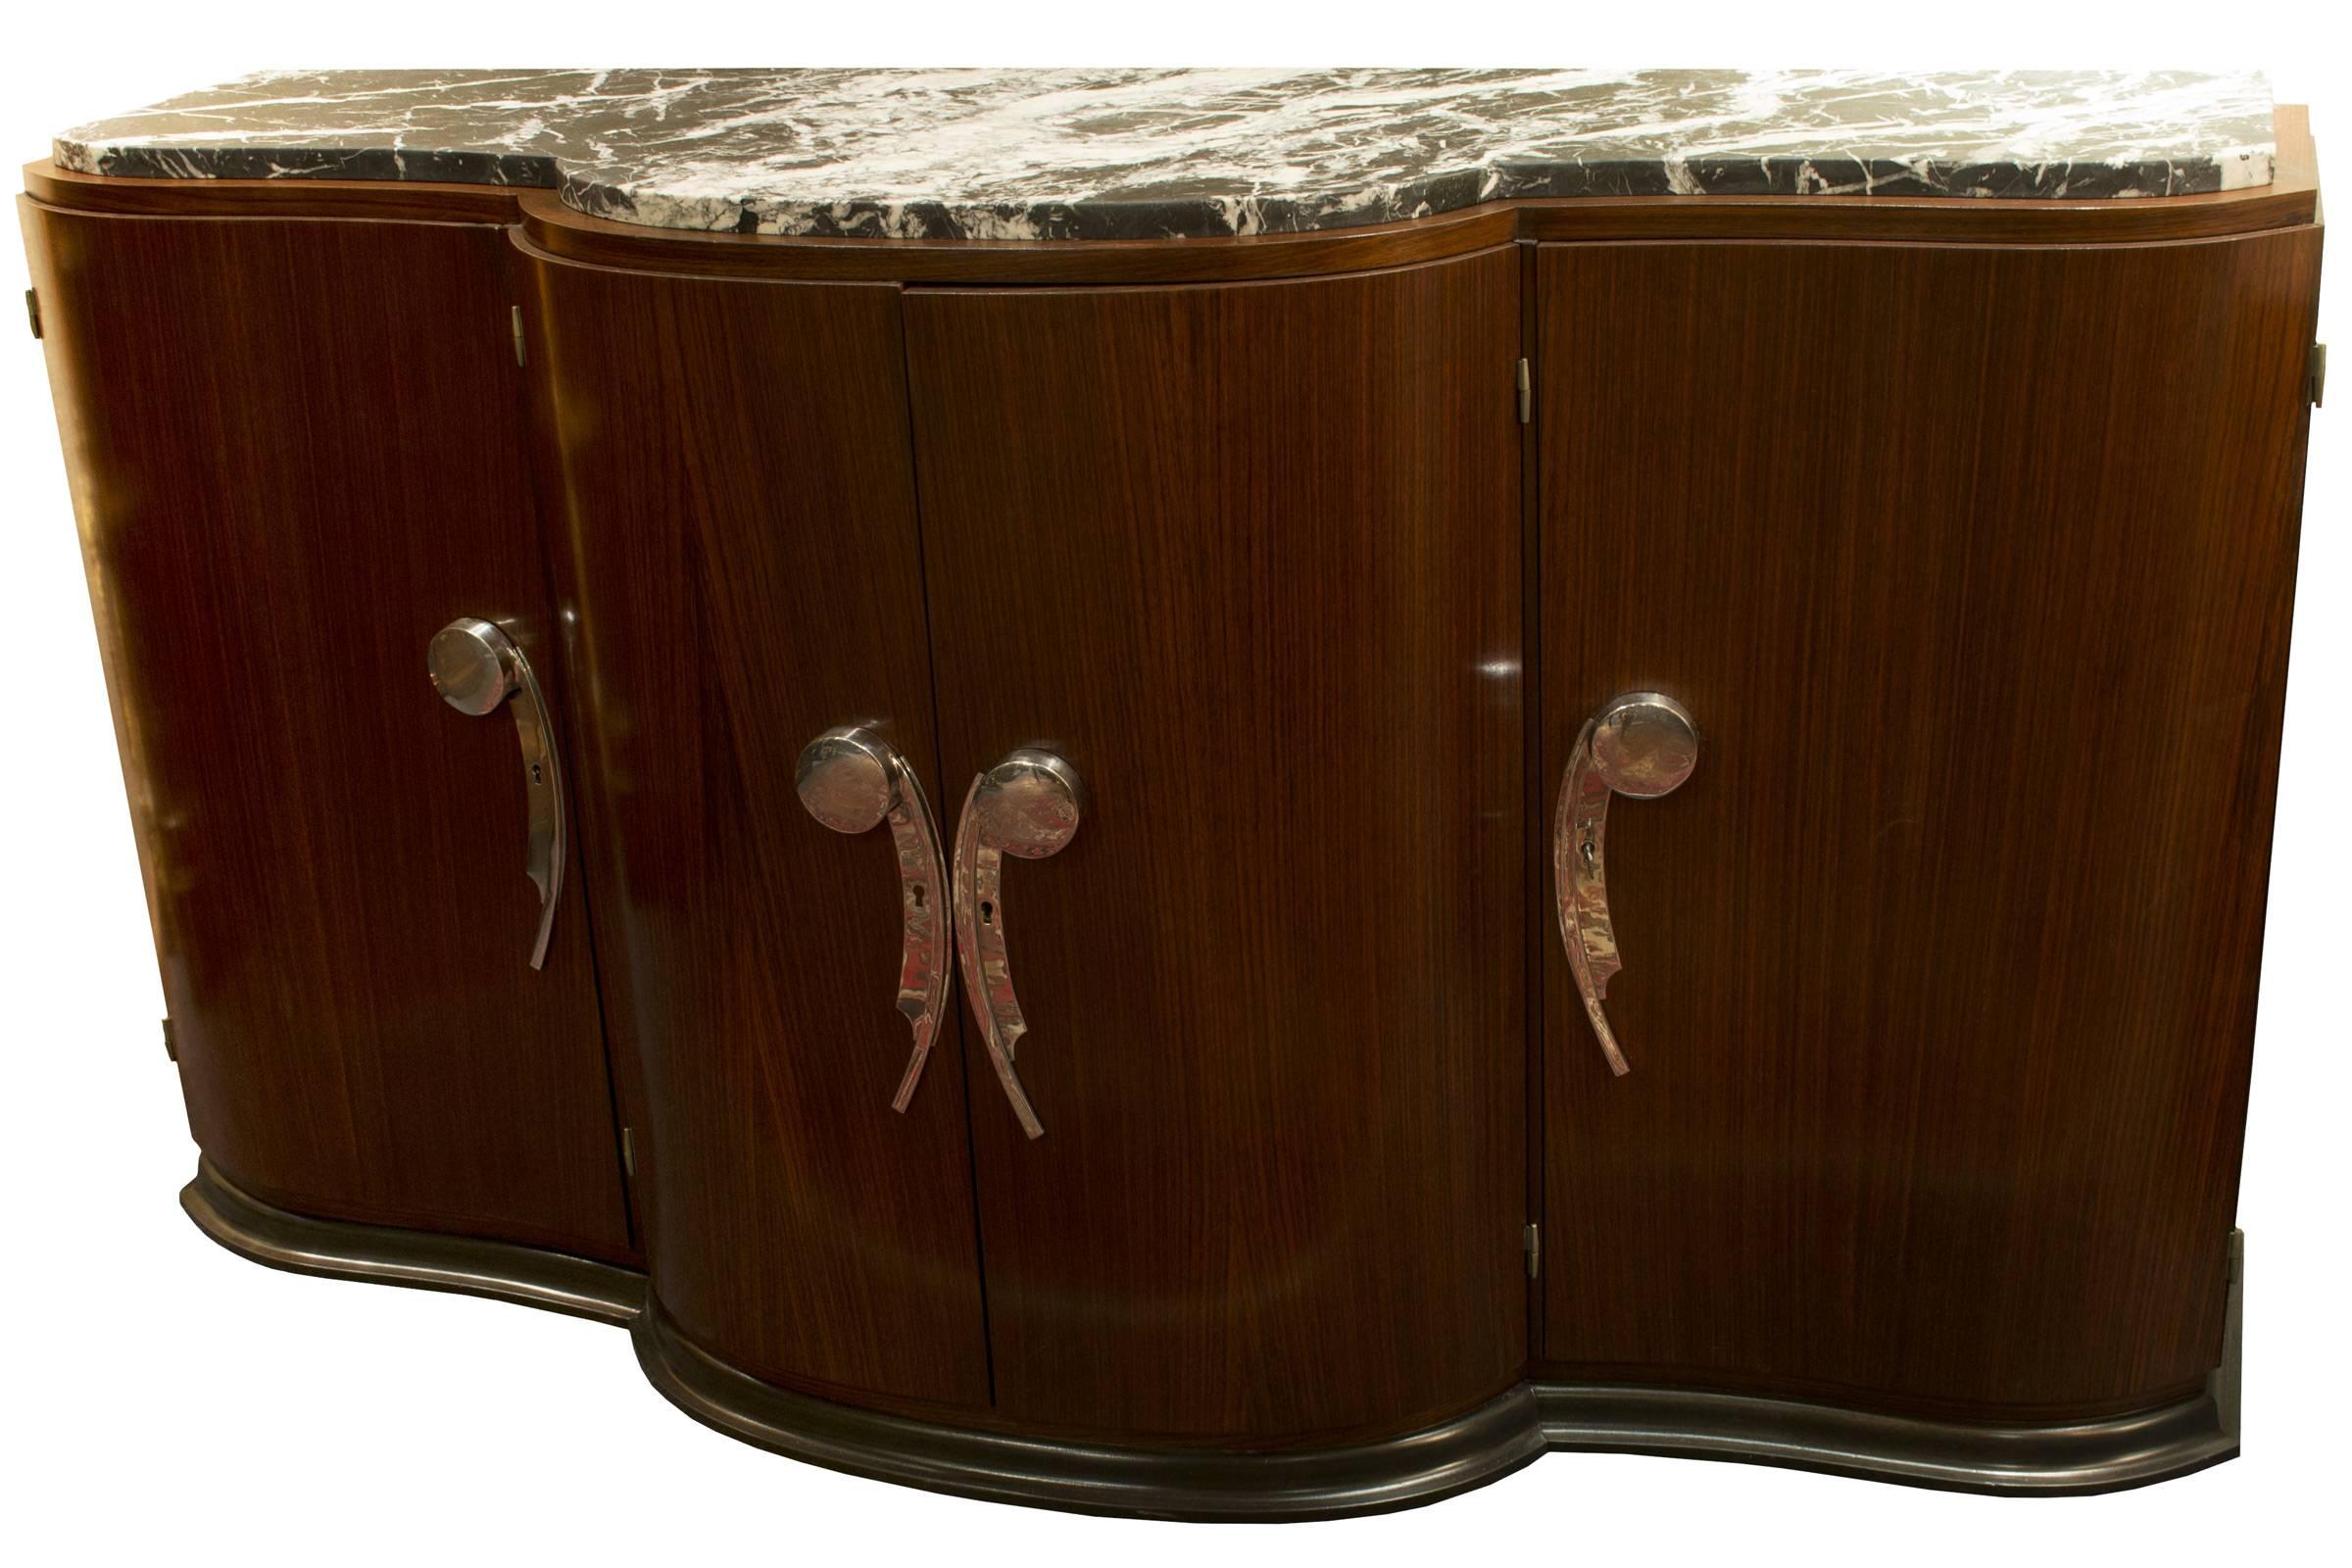 A solid black-and-white marble topped, mid-century French break-front buffet with chromed metal hardware.